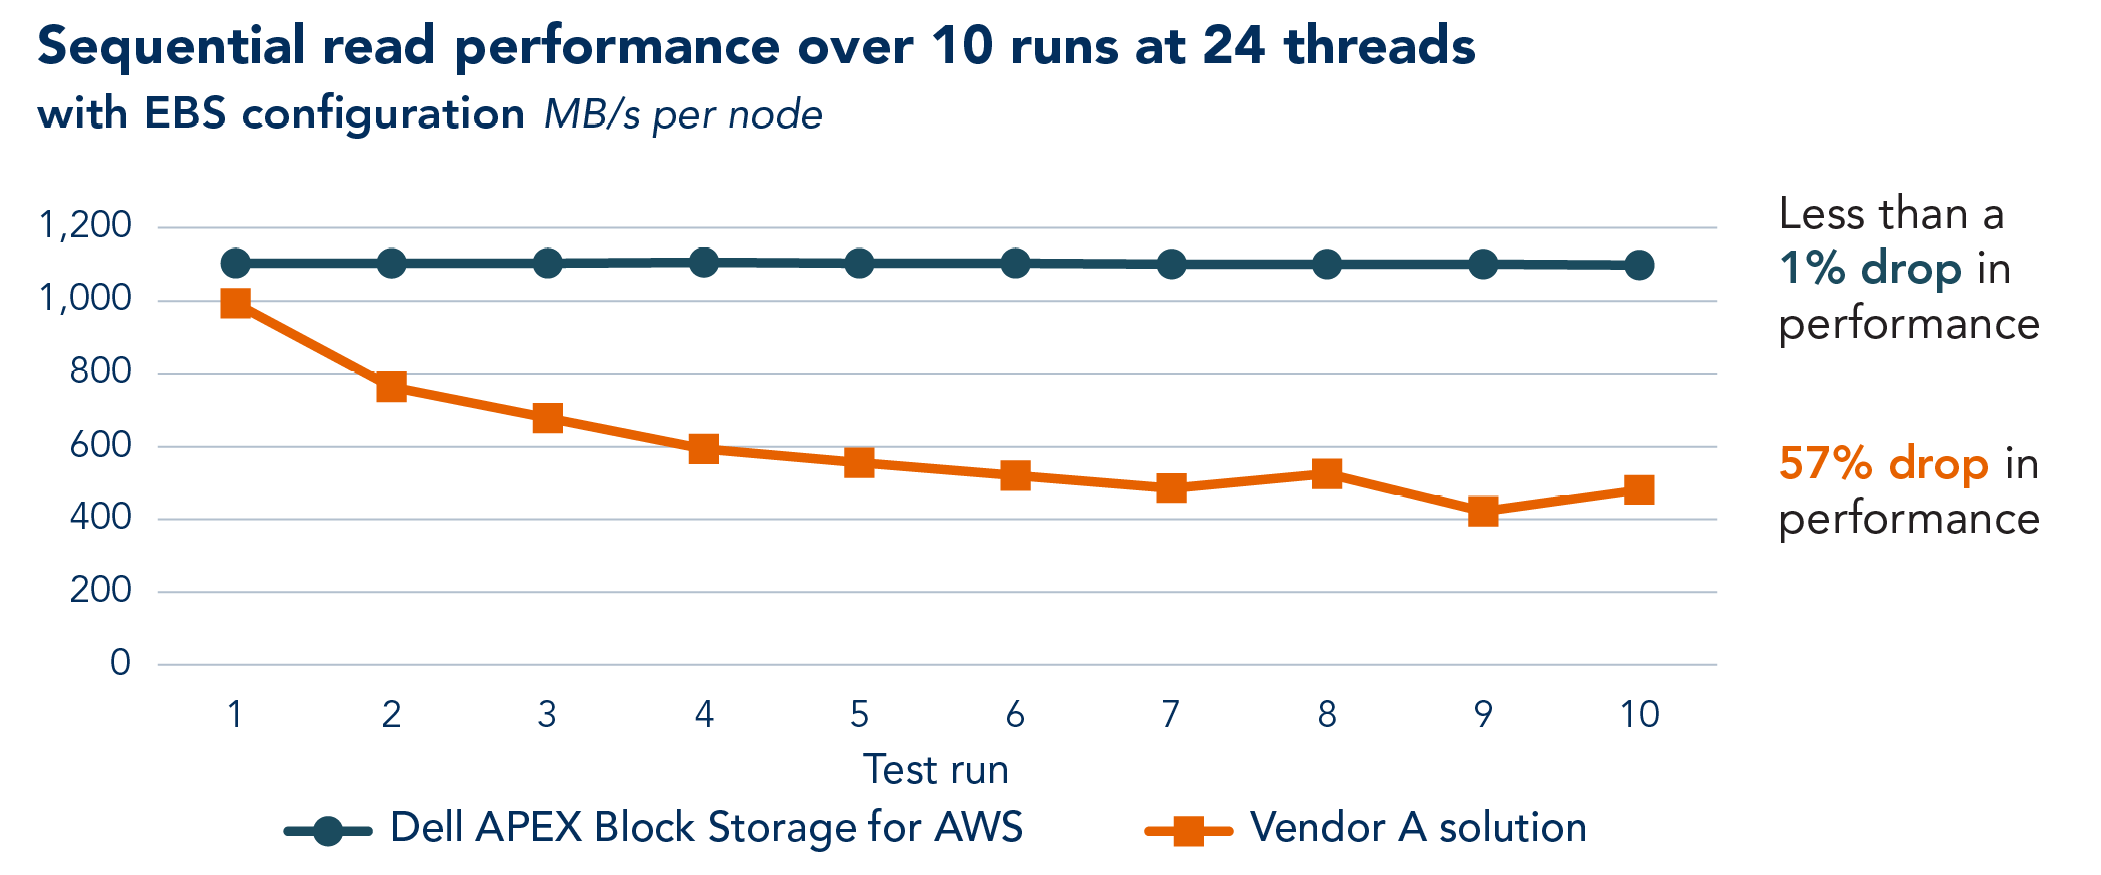 Chart showing the sequential read performance, over 10 runs of Vdbench at 24 threads, of Dell APEX Block Storage for AWS and the Vendor A solution in their EBS configurations. Higher, more stable performance is better. The Dell APEX solution holds about steady between 1,000 and 1,200 MB/s across the 10 runs, and the chart notes less than a 1% drop in performance. The Vendor A solution starts the first run at around 1,000 MB/s and drops over the course of the next five runs before going up and down in runs 7 through 10 between 400 and almost 600 MB/s. For the Vendor A solution, the chart notes a 57% drop in performance.